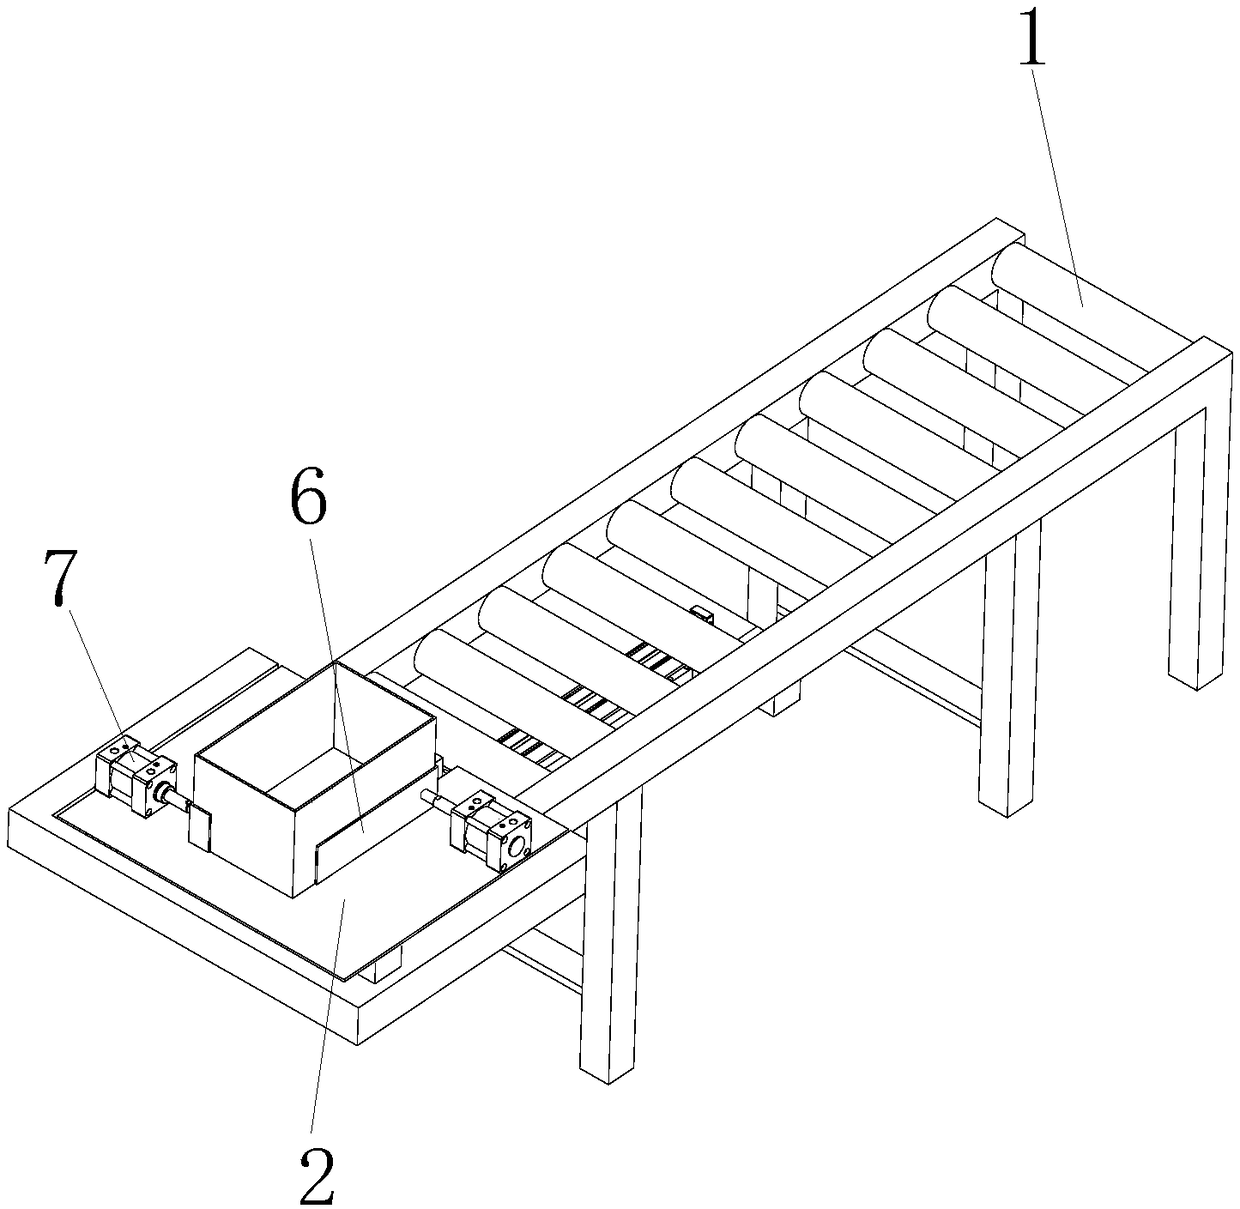 Transportation device with carton positioning and pushing-out functions